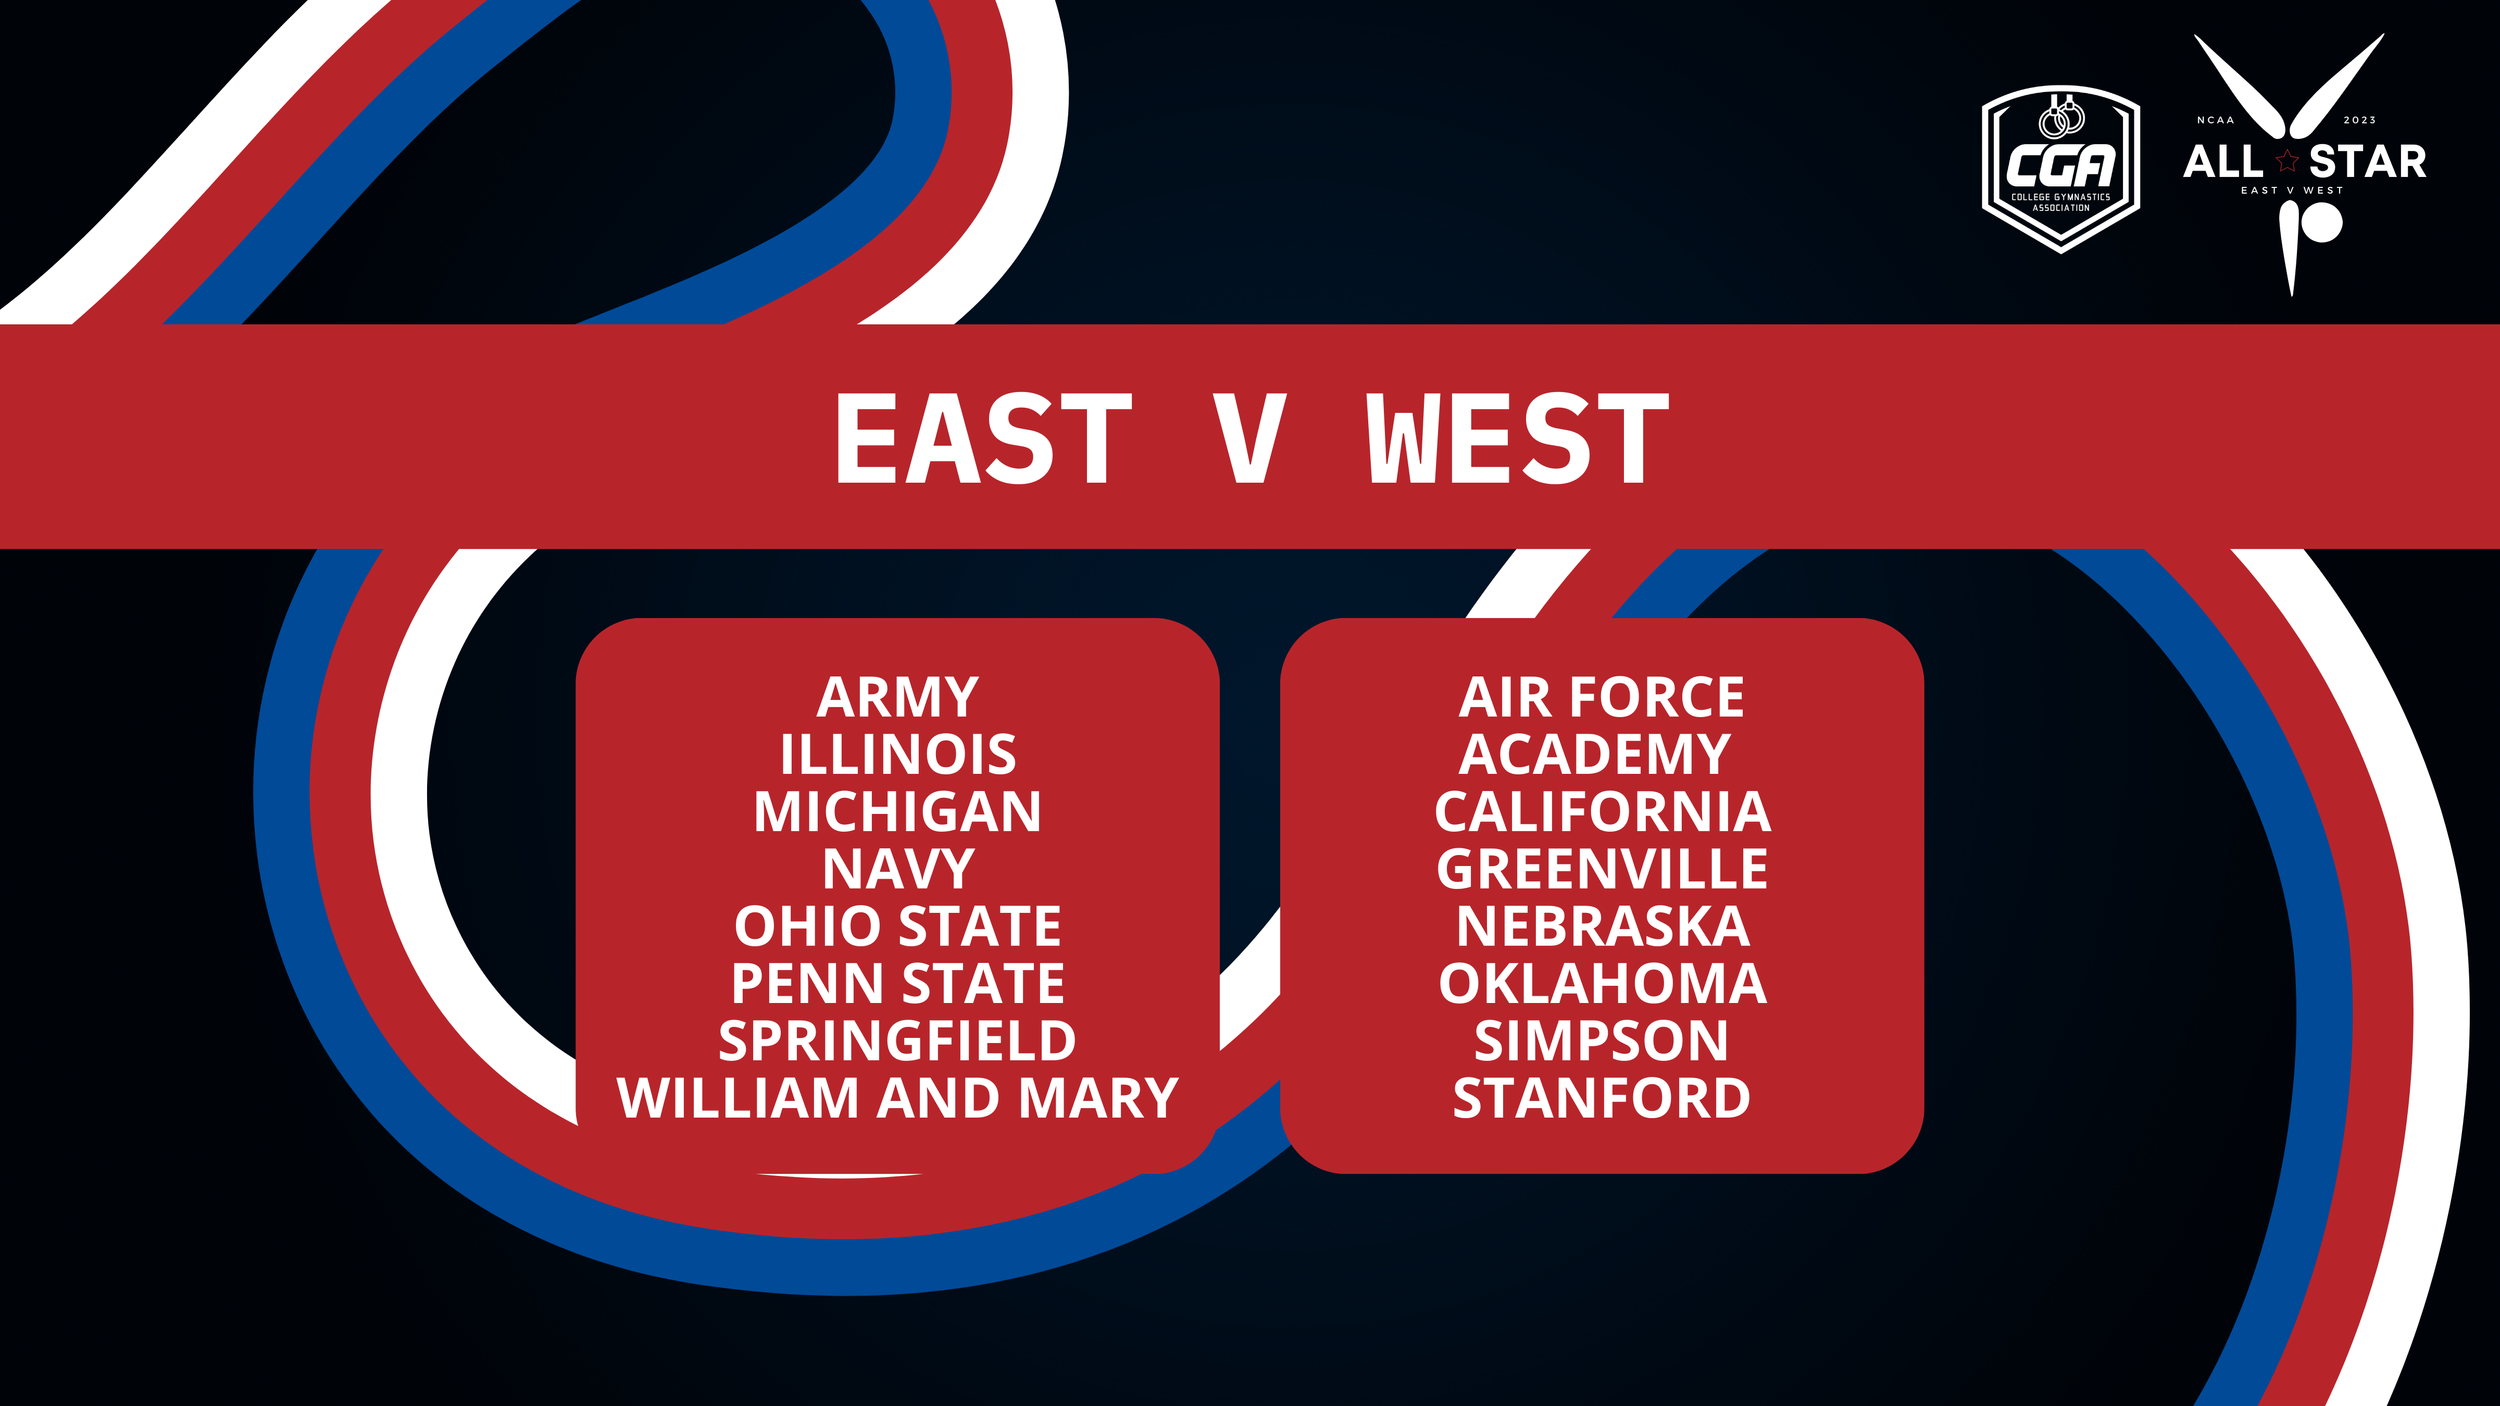 Which teams are competing for the East and West teams for the 2023 CGA All-Stars meet.

The East team features athletes from Army, Illinois, Michigan, Navy, Ohio State, Penn State, Springfield, and William and Mary.

The West team features athletes from the Air Force Academy, California, Greenville, Nebraska, Oklahoma, Simpson, and Stanford.